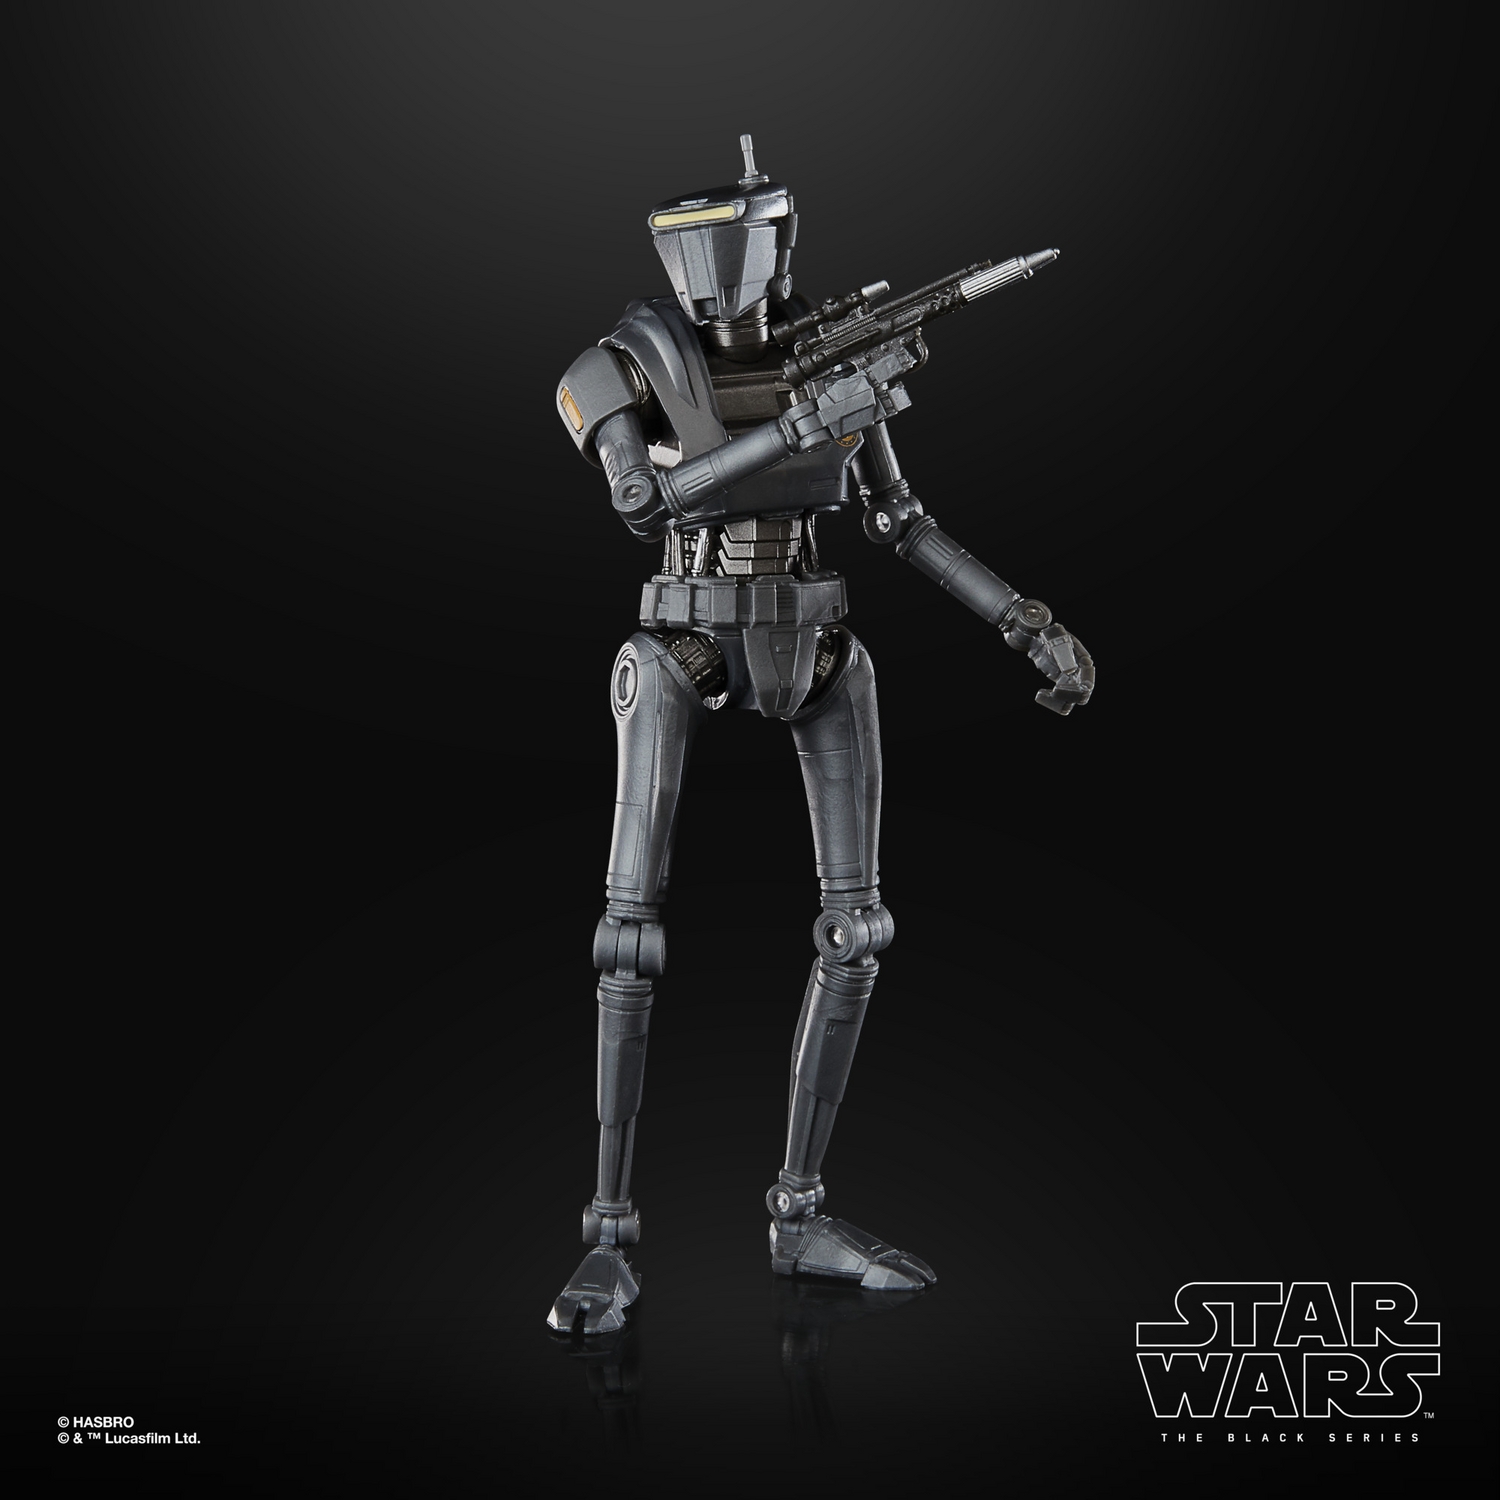 STAR WARS THE BLACK SERIES 6-INCH NEW REPUBLIC SECURITY DROID FIGURE - 8.jpg